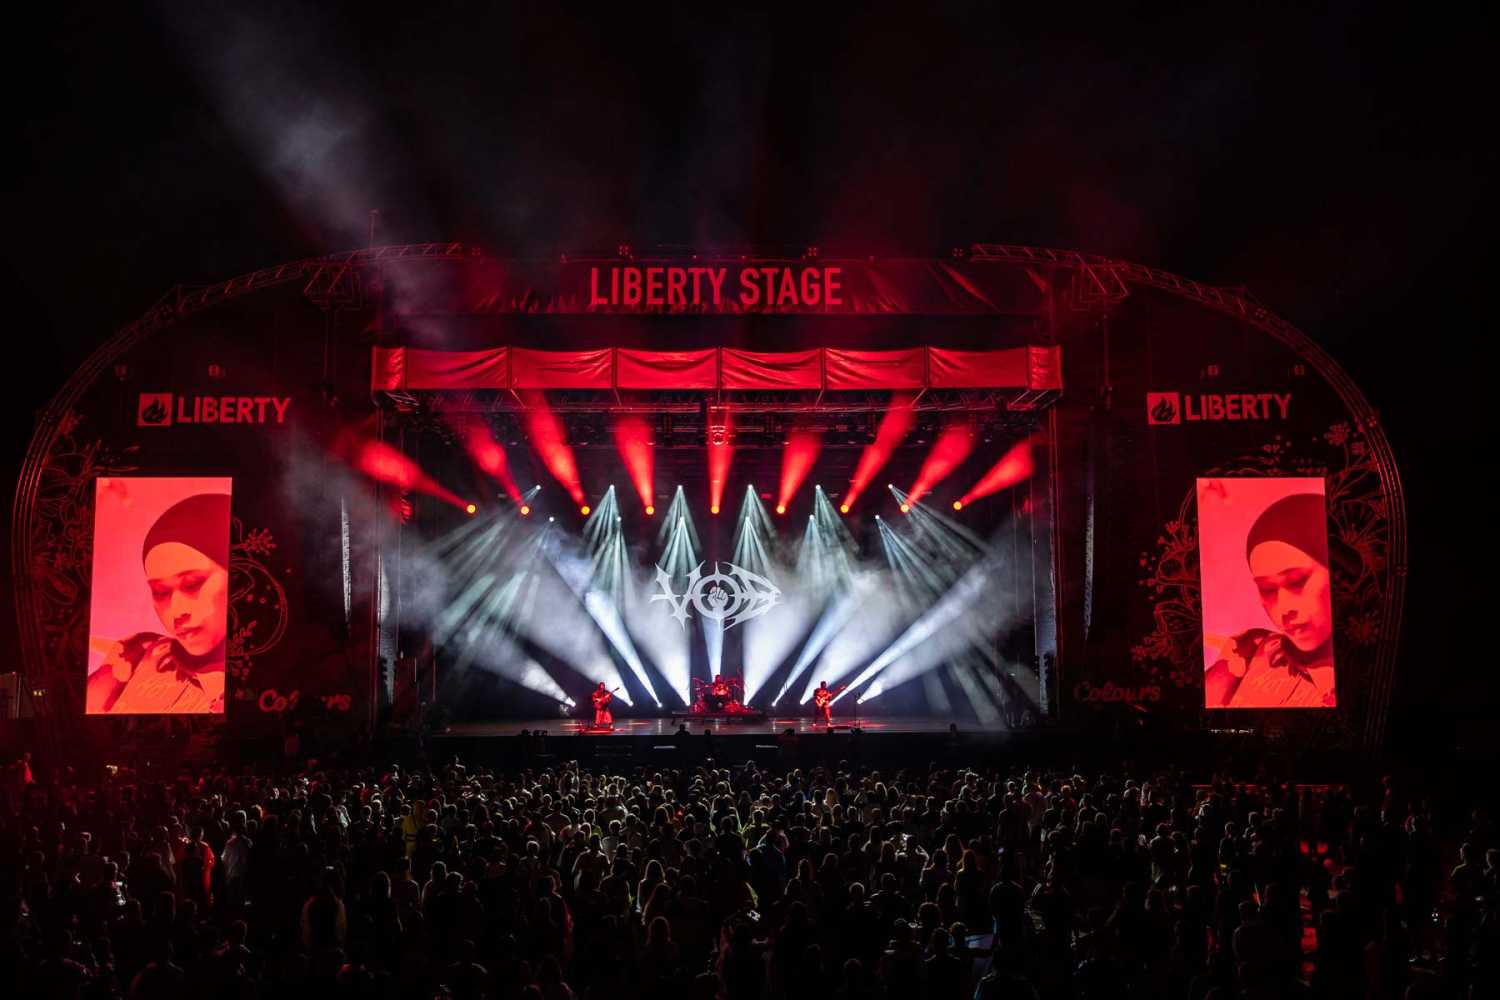 The Liberty Stage featured Robe moving lights provided by rental specialist AV Media Events (photo: Louise Stickland)